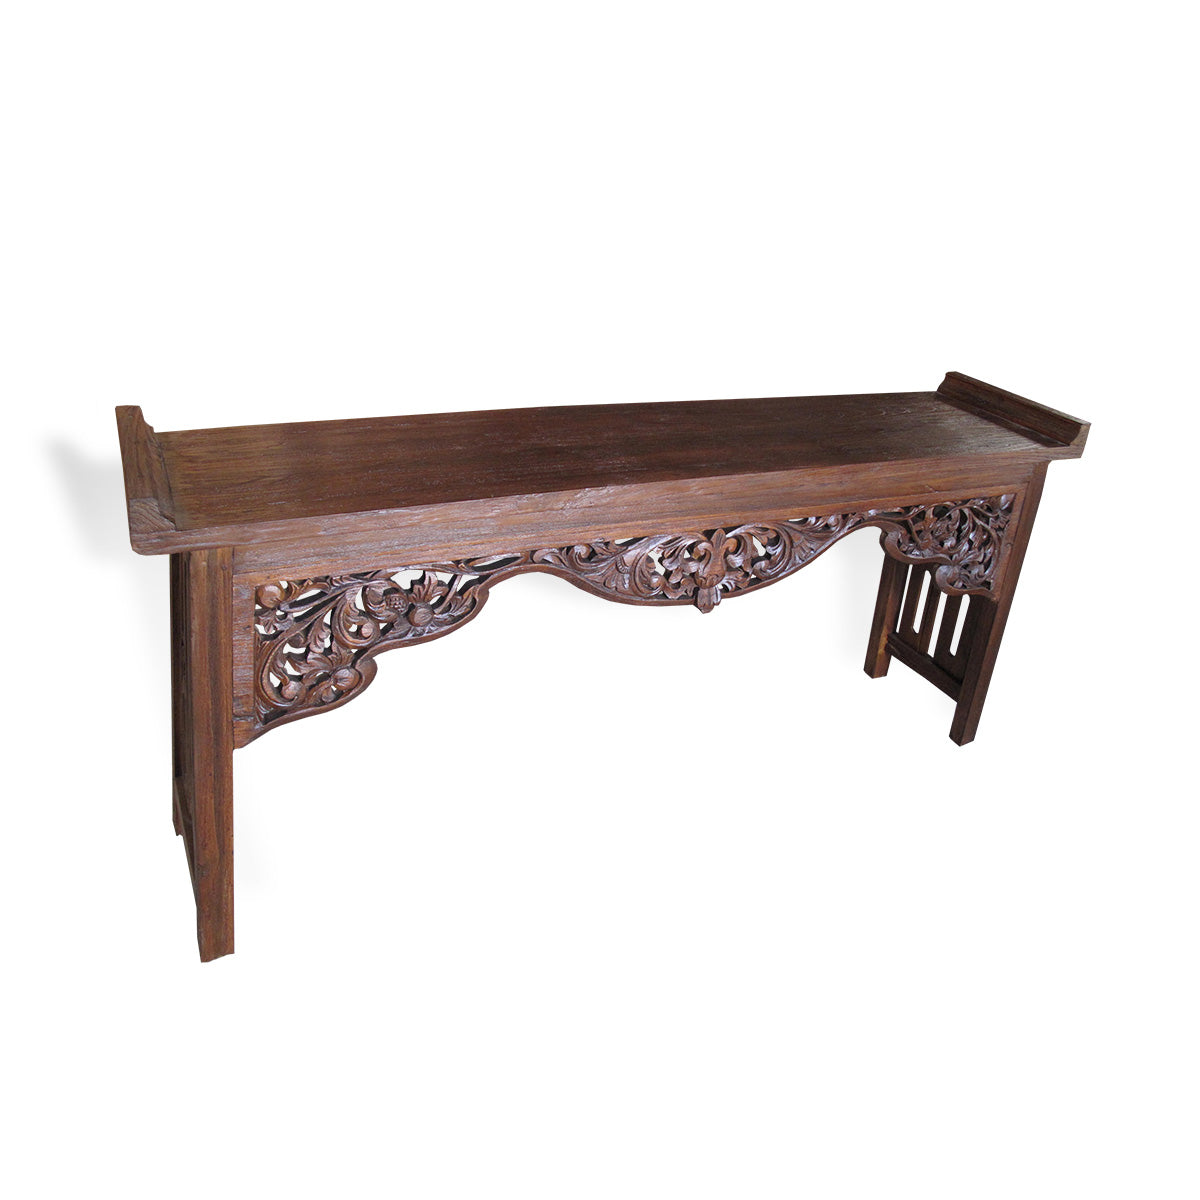 LAC047-1 MEDIUM BROWN RECYCLED TEAK WOOD CARVED CONSOLE TABLE